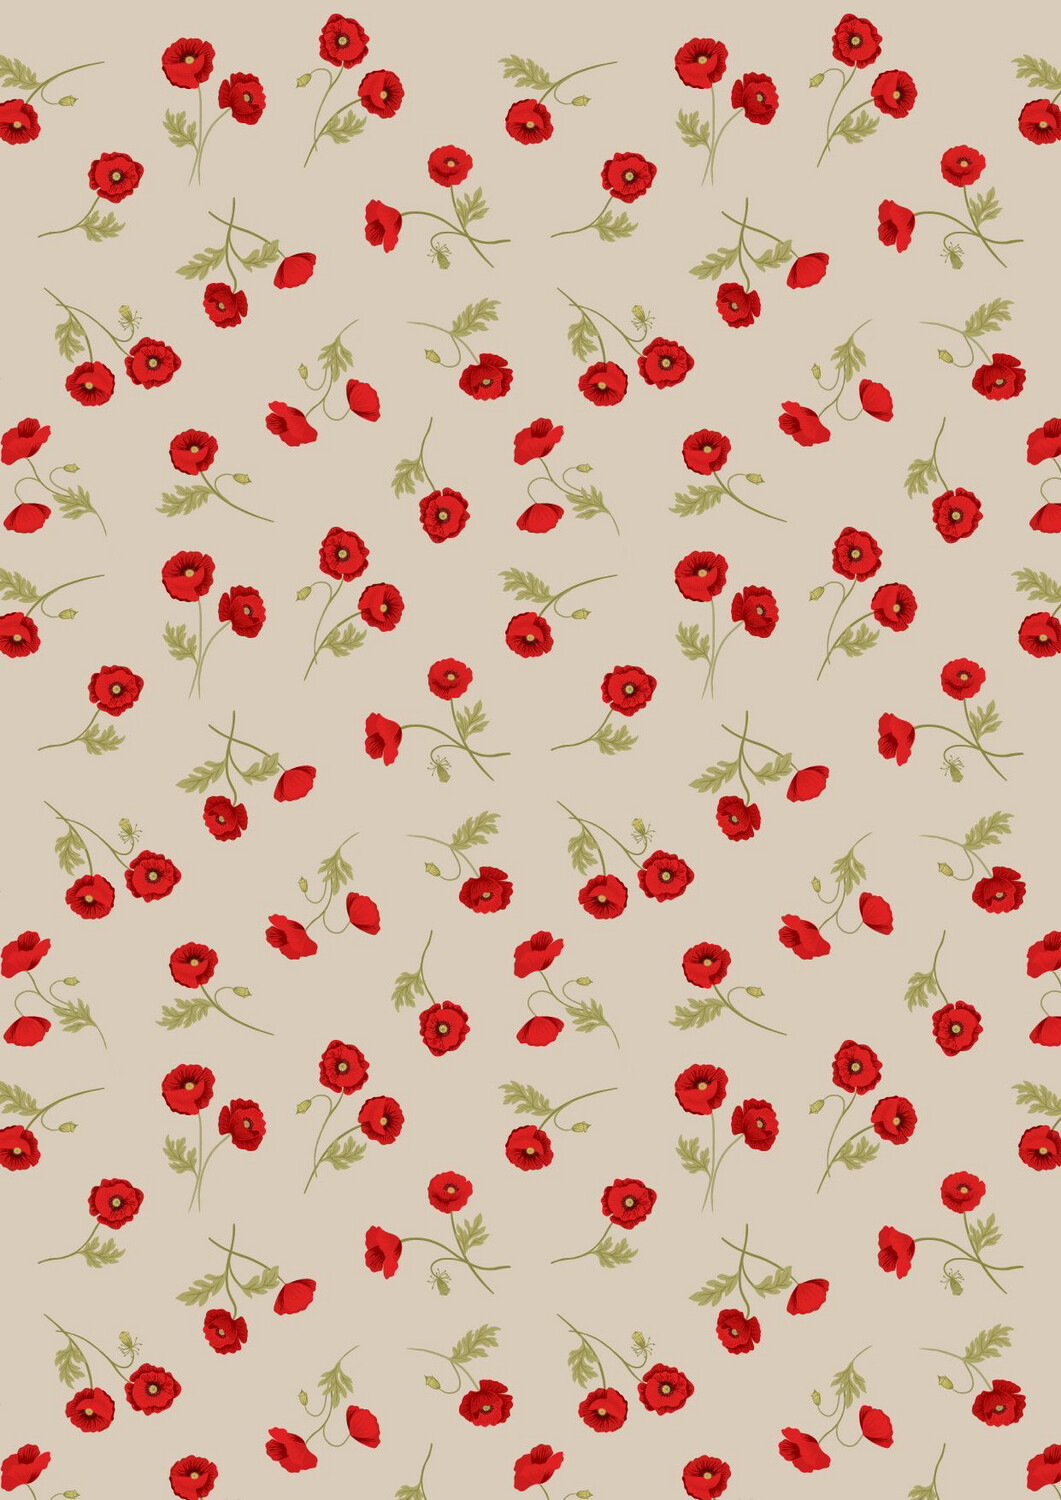 Lewis & Irene - Poppies - Little Poppies On Natural A556.1 (Width of Fabric By 25cm) - R3